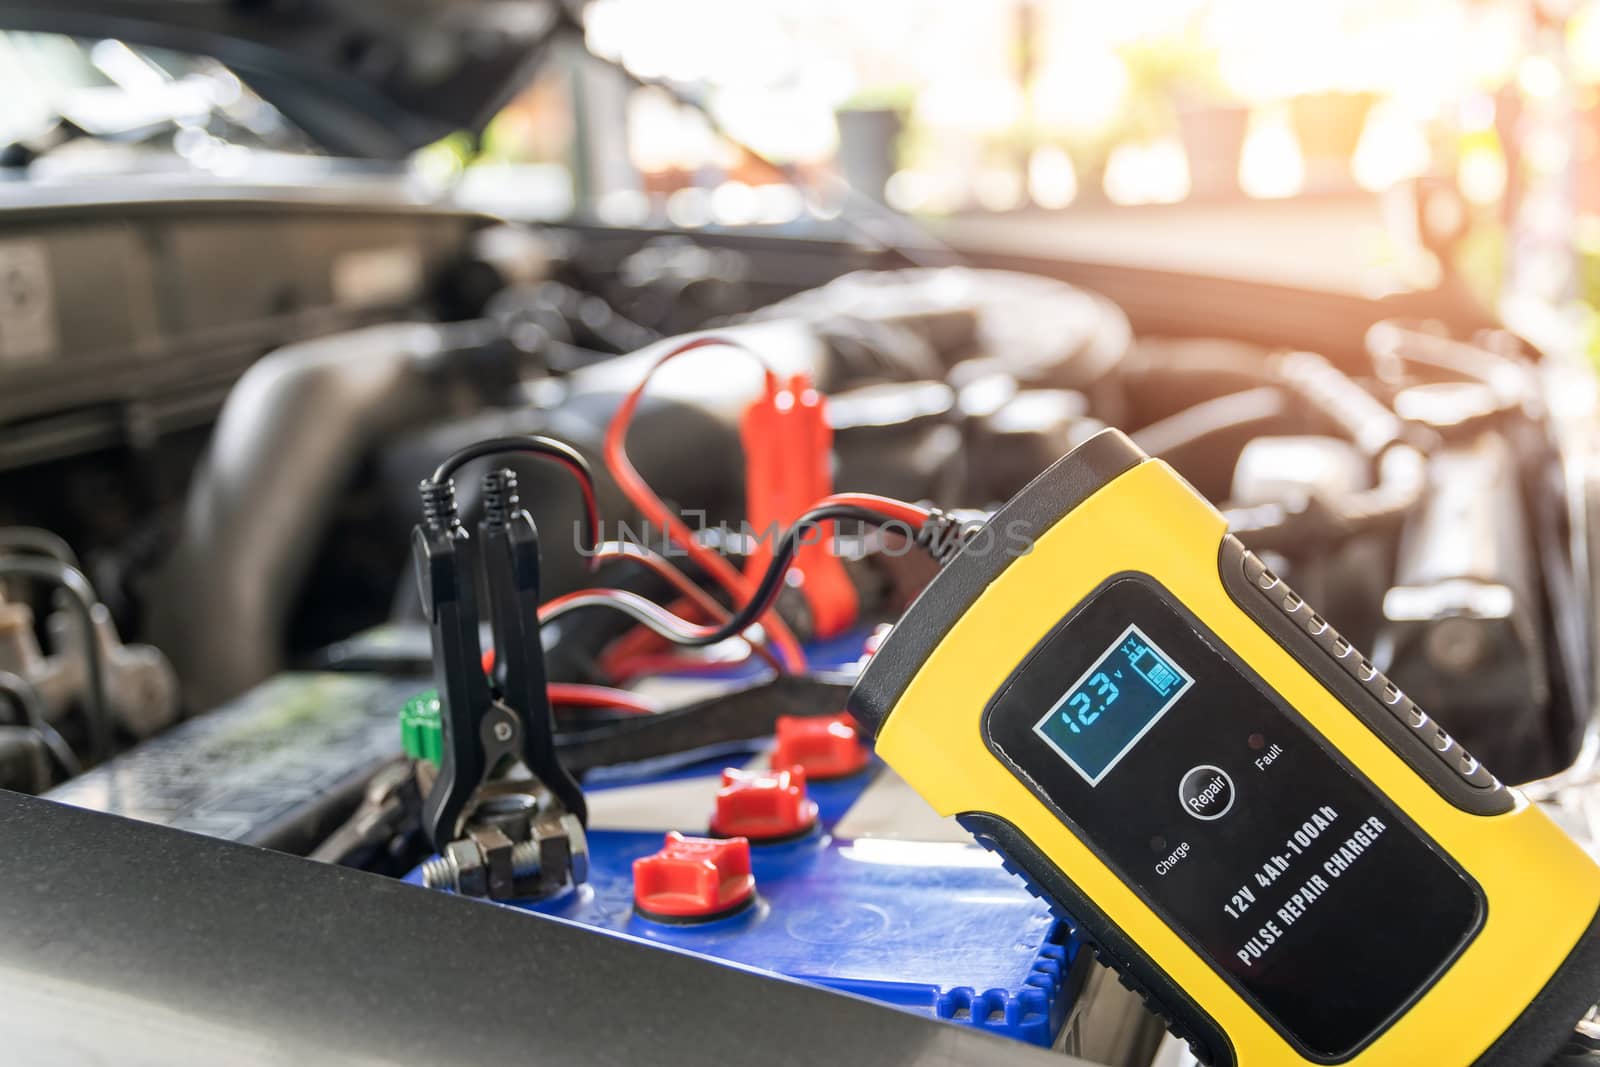 Instrumentation of voltage and temperature of the car battery.